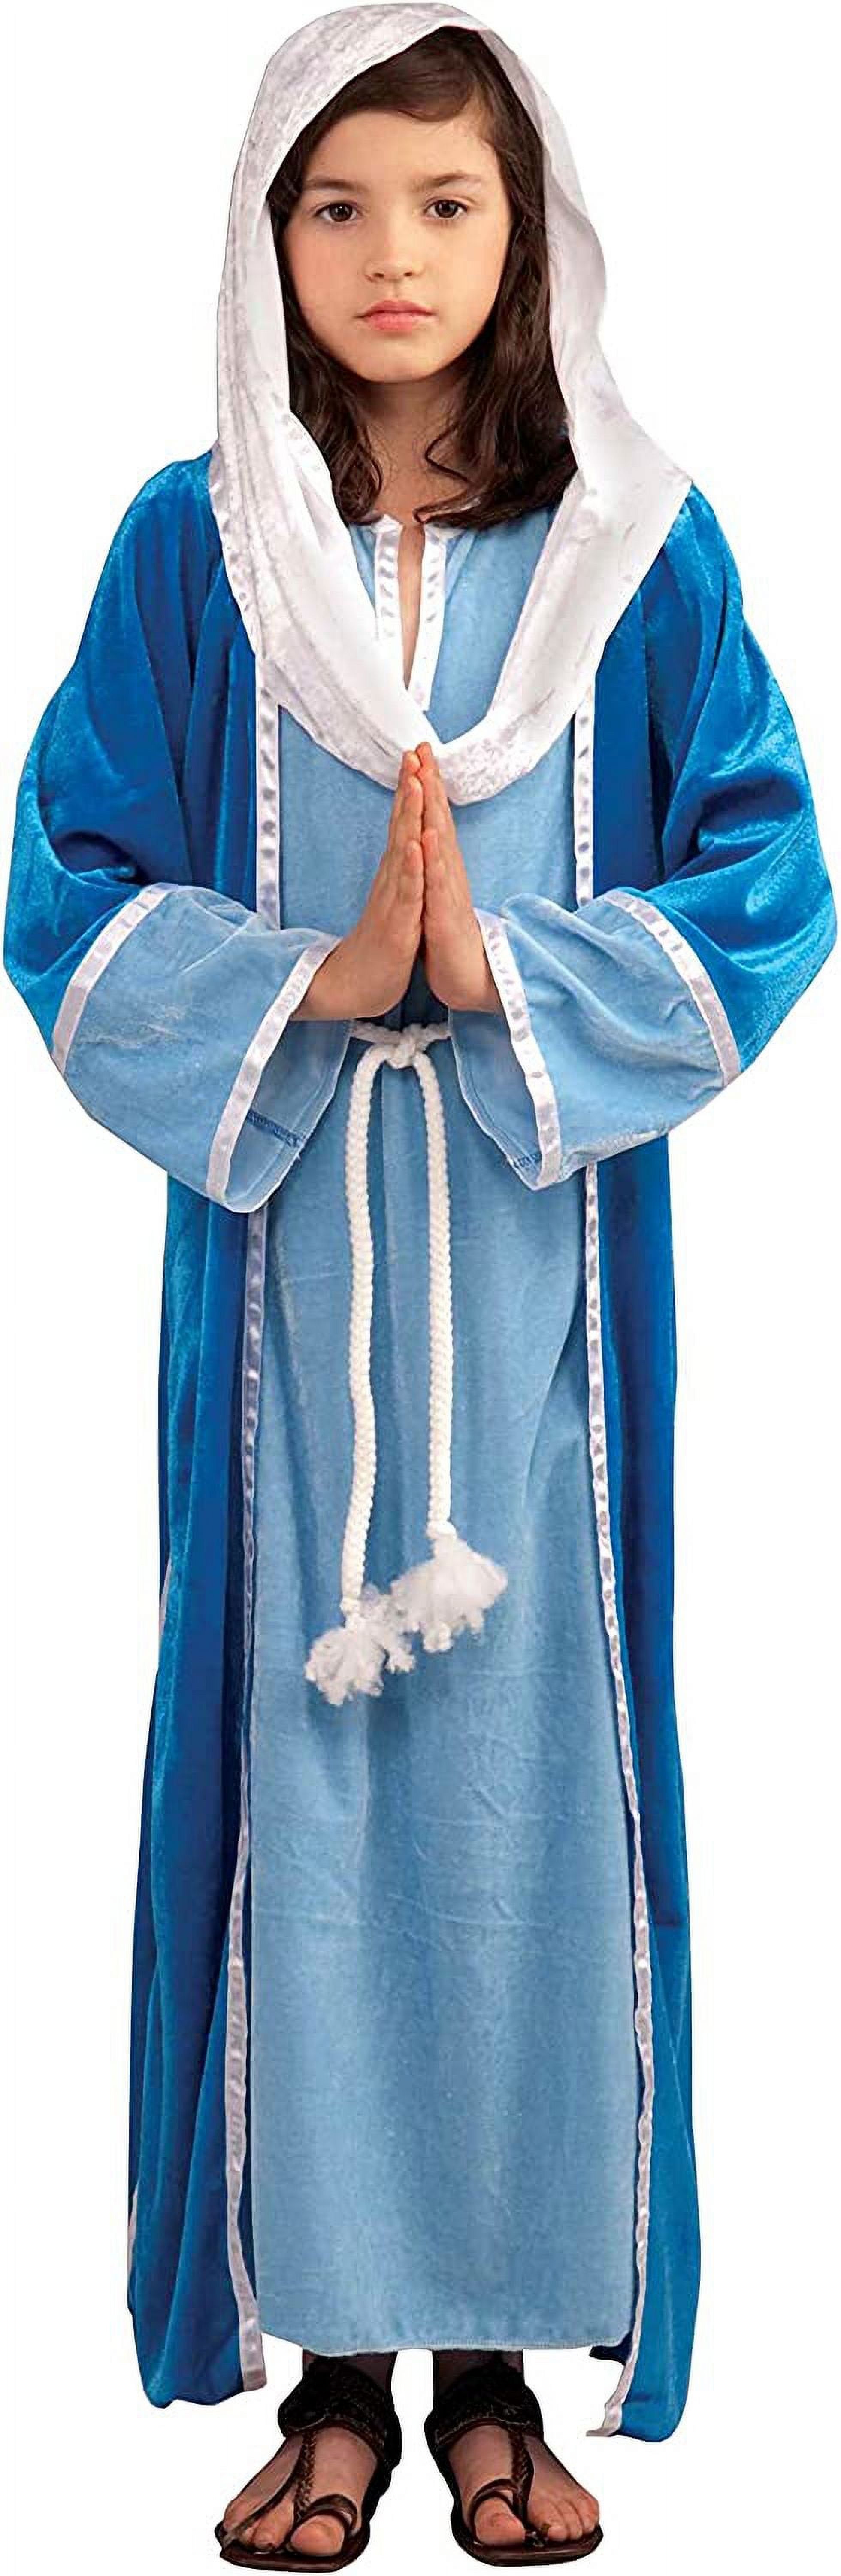 Forum Novelties Biblical Times Deluxe Mary Costume, Child Large - image 1 of 3